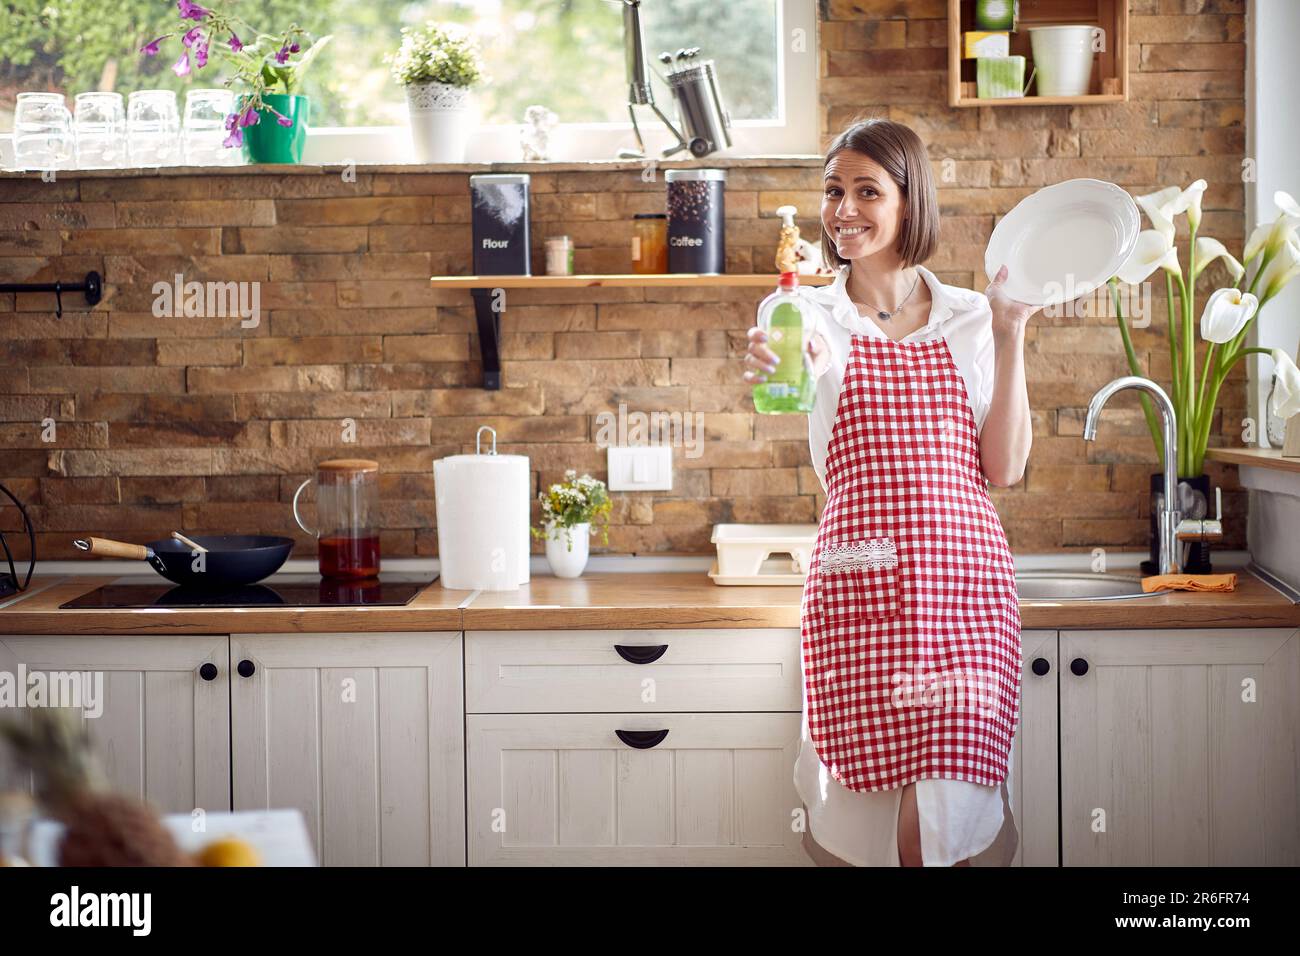 https://c8.alamy.com/comp/2R6FR74/attractive-young-housewife-wearing-checkered-apron-standing-in-the-kitchen-holding-a-clean-plate-and-demonstrating-favourite-dishwashing-detergent-and-2R6FR74.jpg